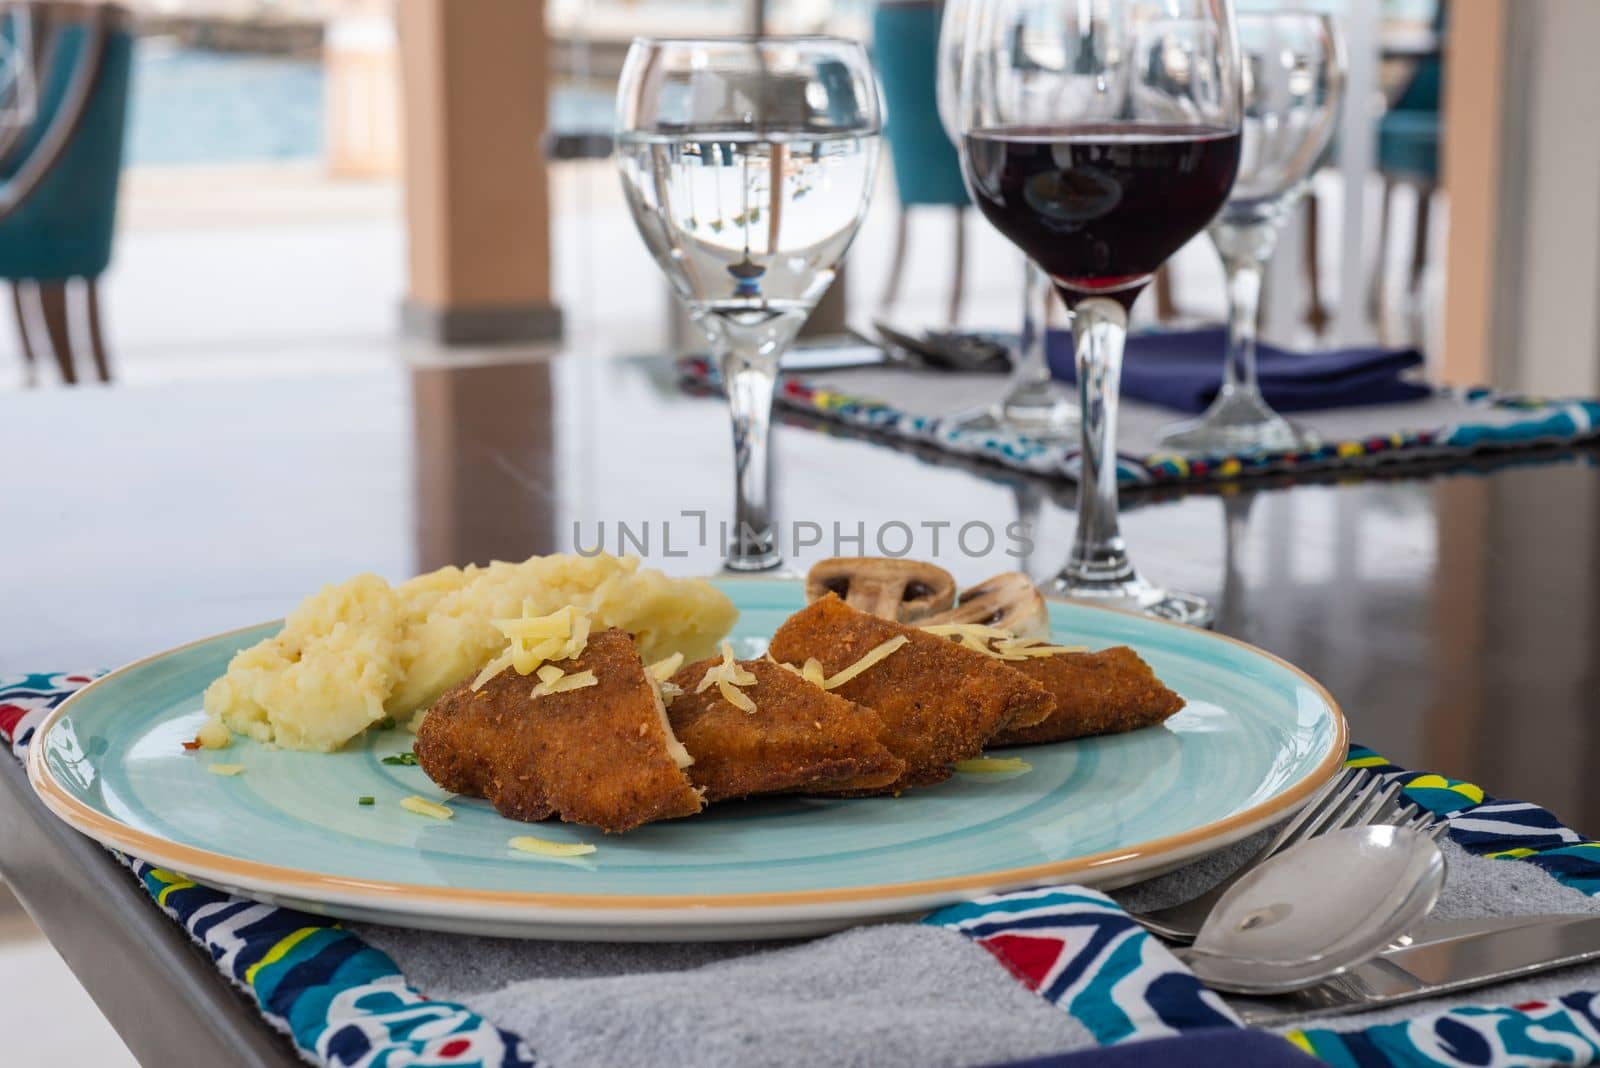 Stuffed chicken panne a la carte meal with mushrooms and mashed potato at restaurant table setting